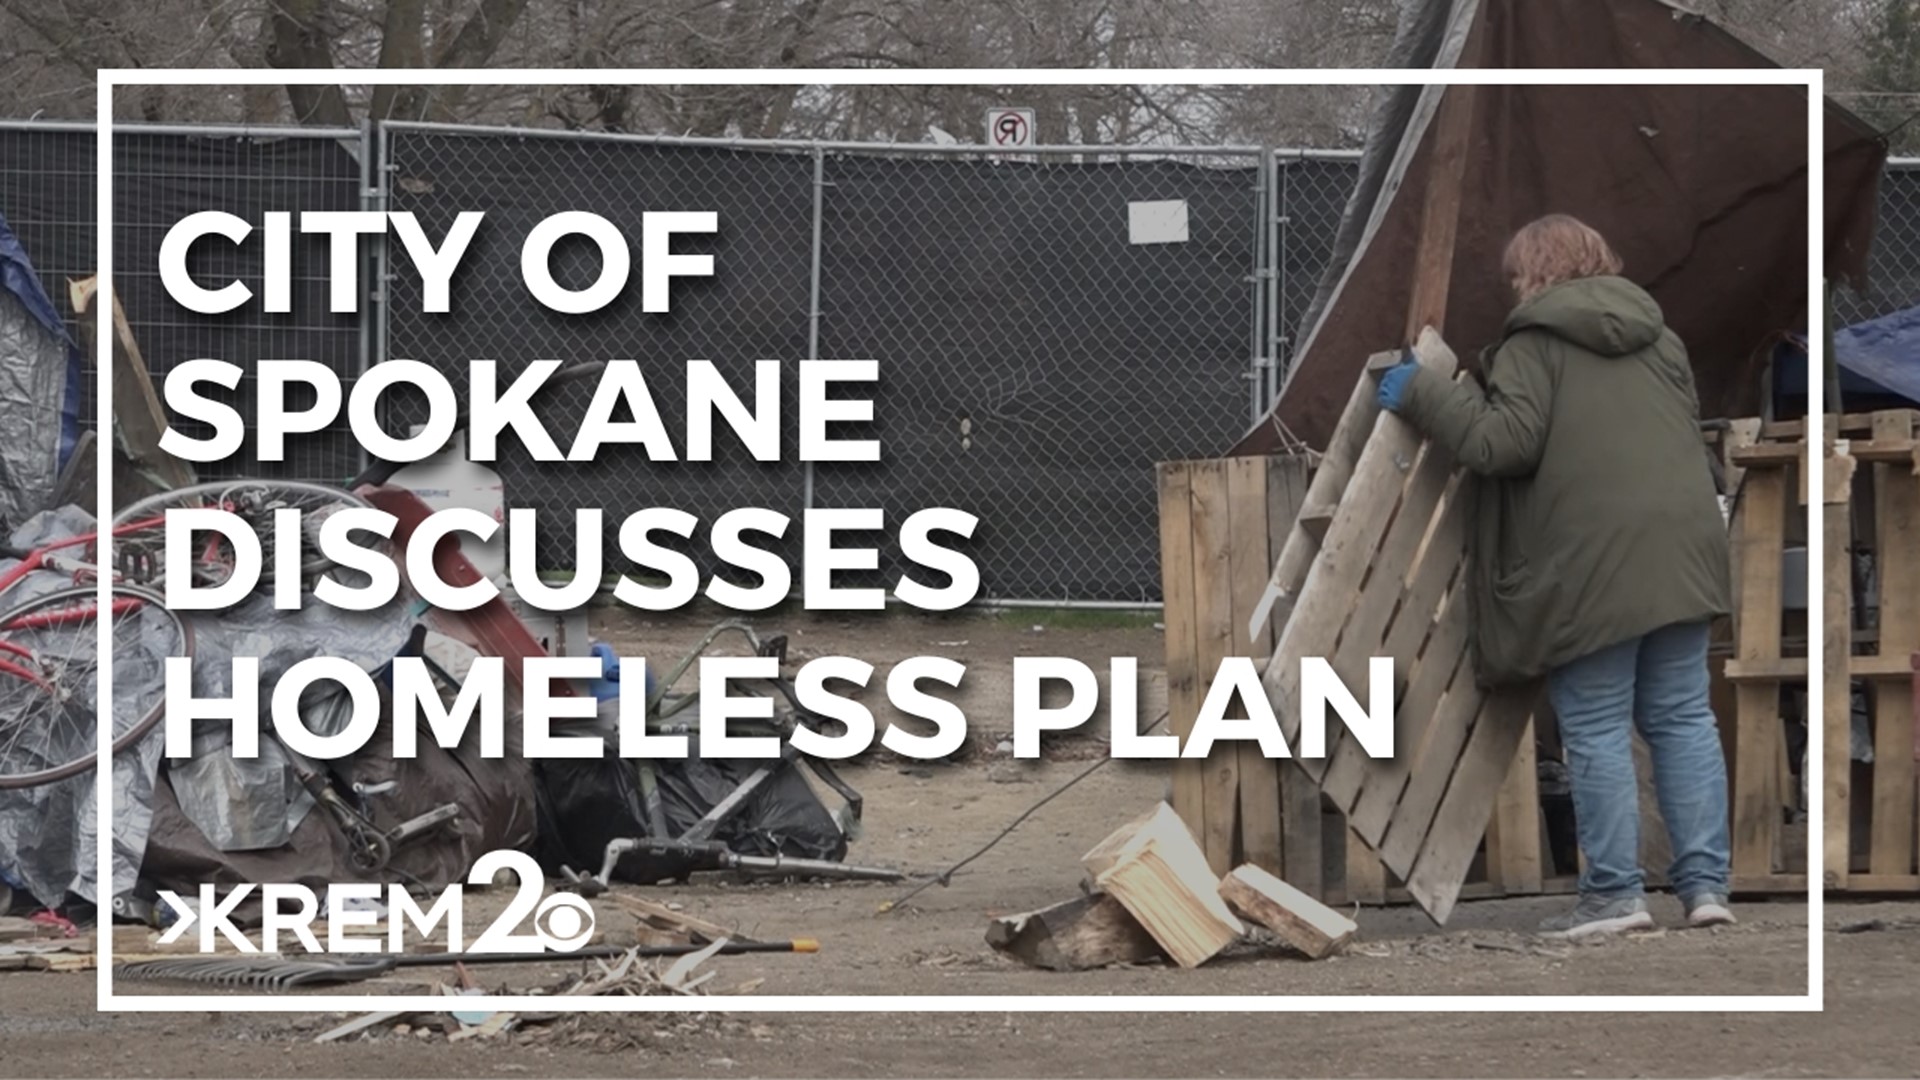 Spokane Unite is comprised of leaders and residents who want to work together to solve homelessness in the area.